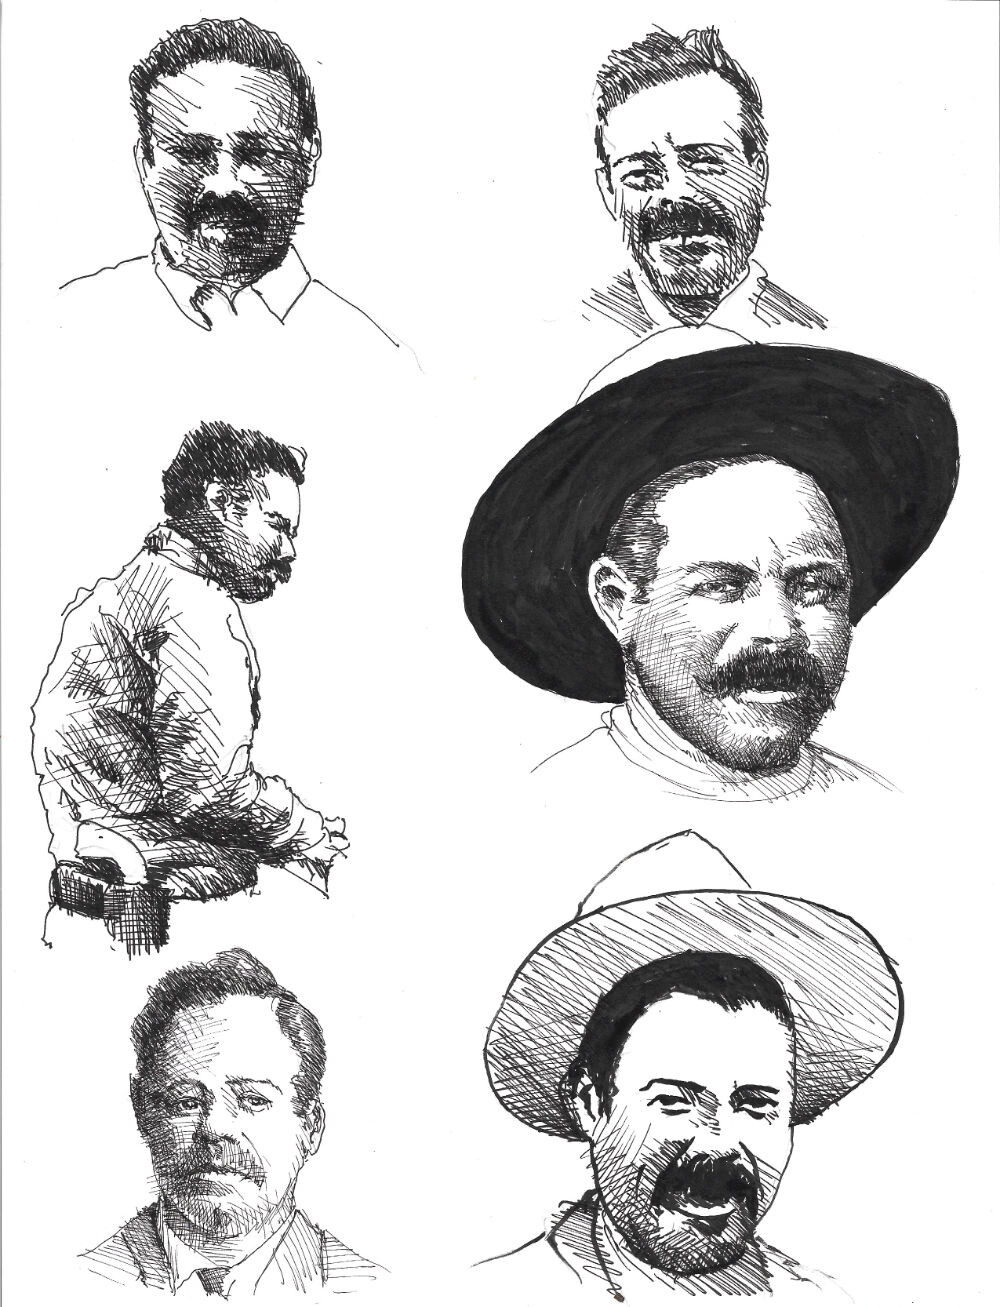 Sketches of Pancho Villa in pen and ink.